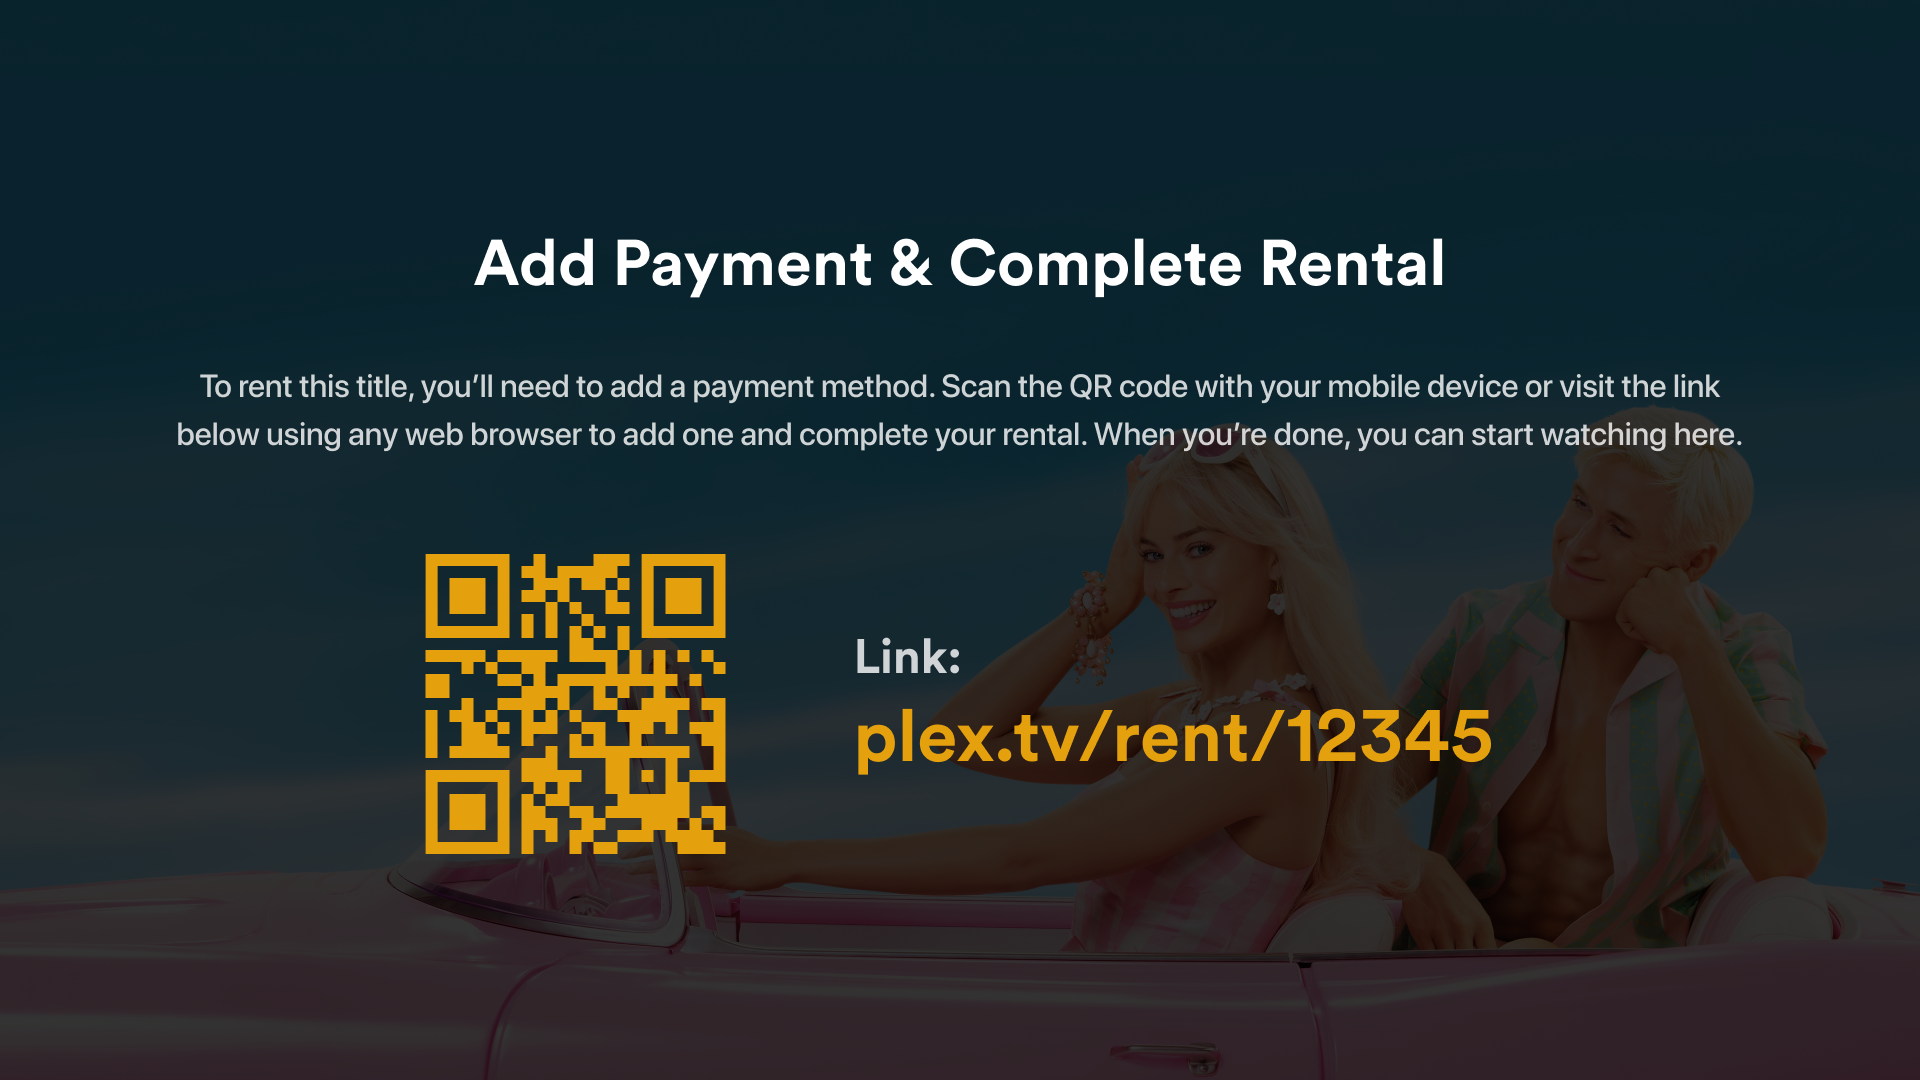 Screen titled Add Payment & Complete Rental, informing the user that they need to first add a payment method to their Plex account before they can complete the rental. A QR code and a URL are provided, both of which will take the user to the Plex website to add the payment method and then complete the rental process.